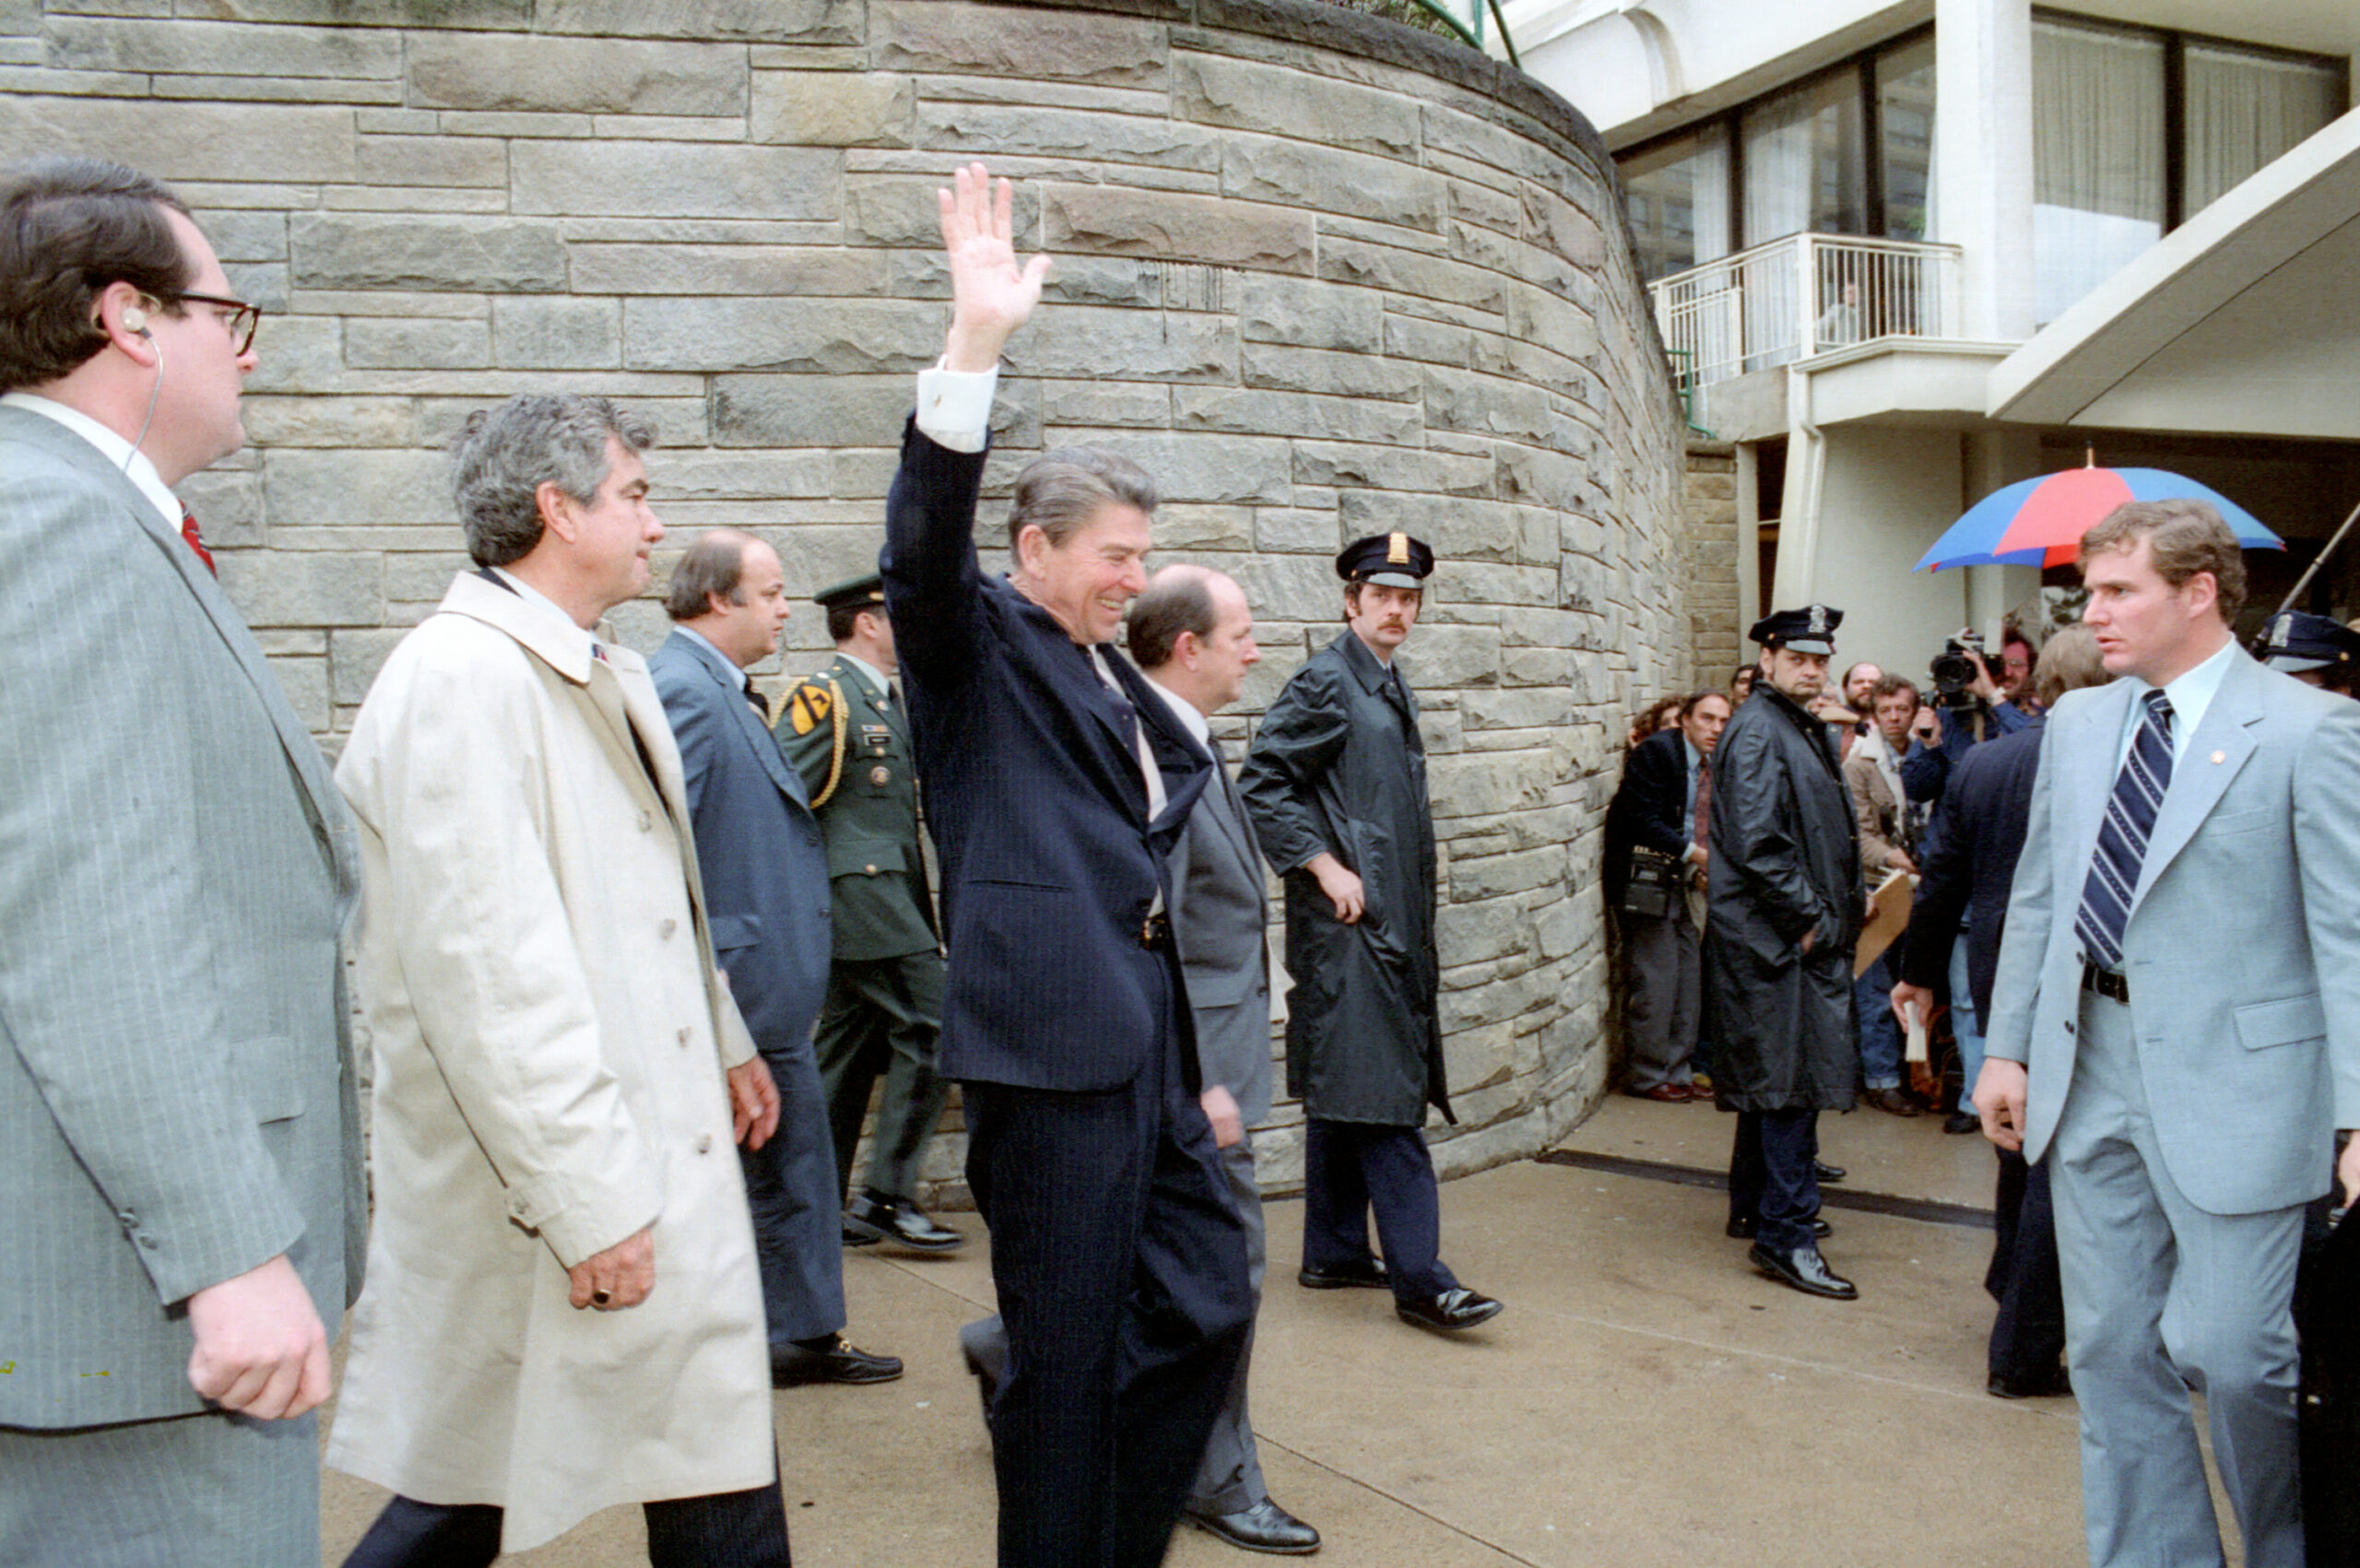 President Reagan waving to crowd moments before he is shot.